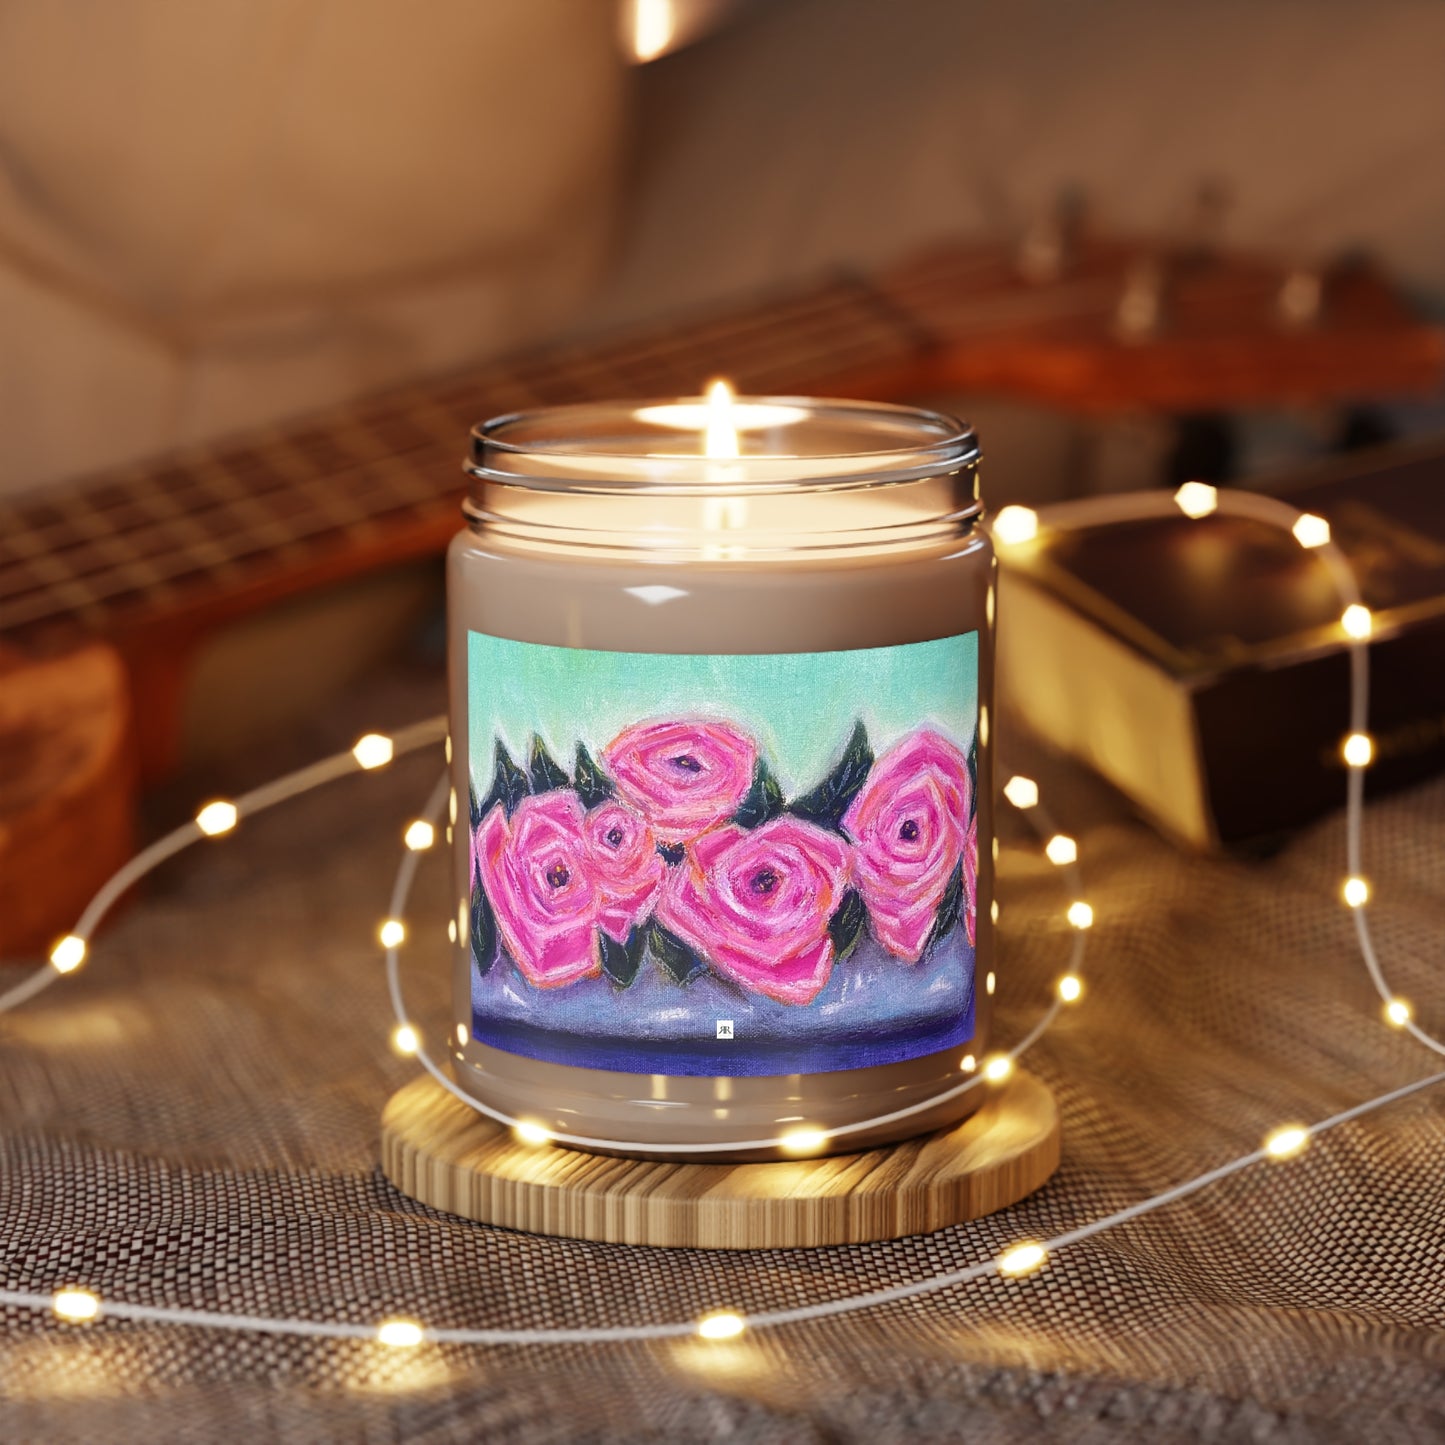 Tin Full of Roses Scented Candle 9oz